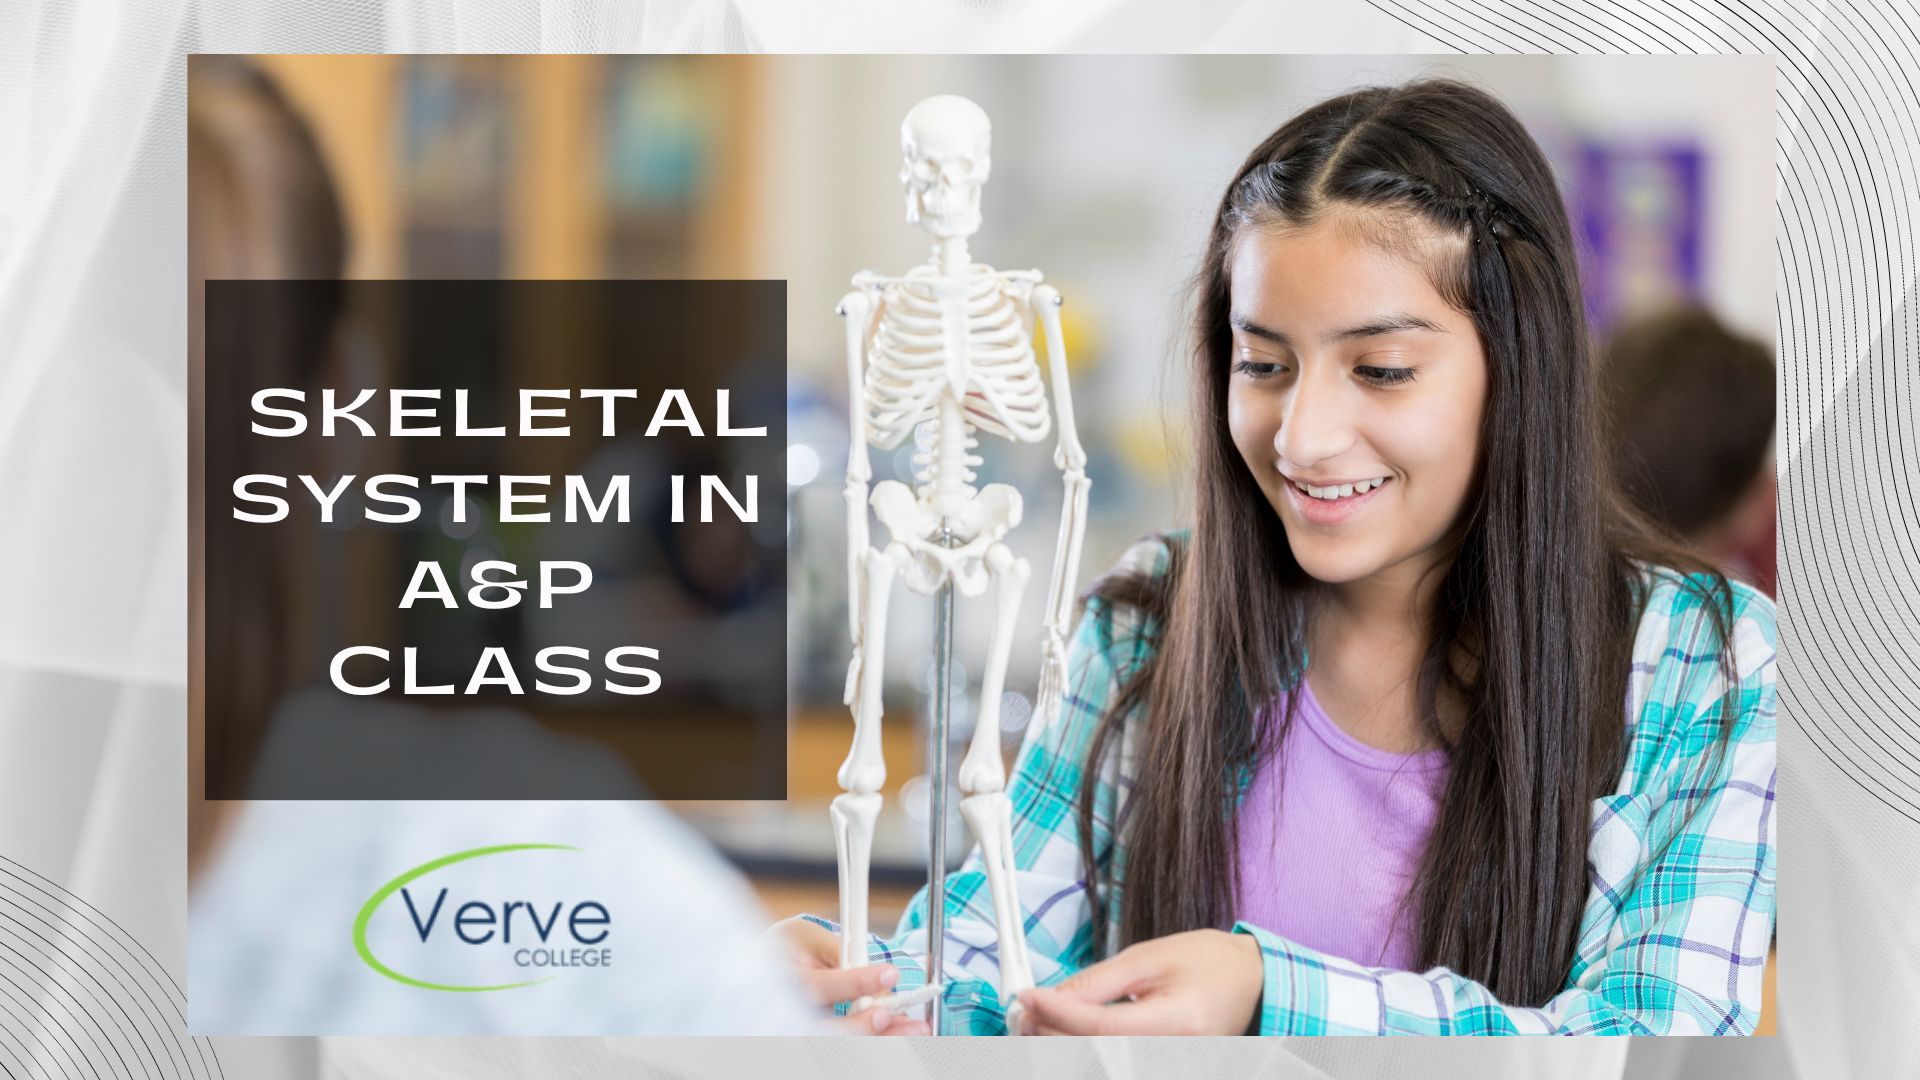 Understanding the Skeletal System in A&P Class